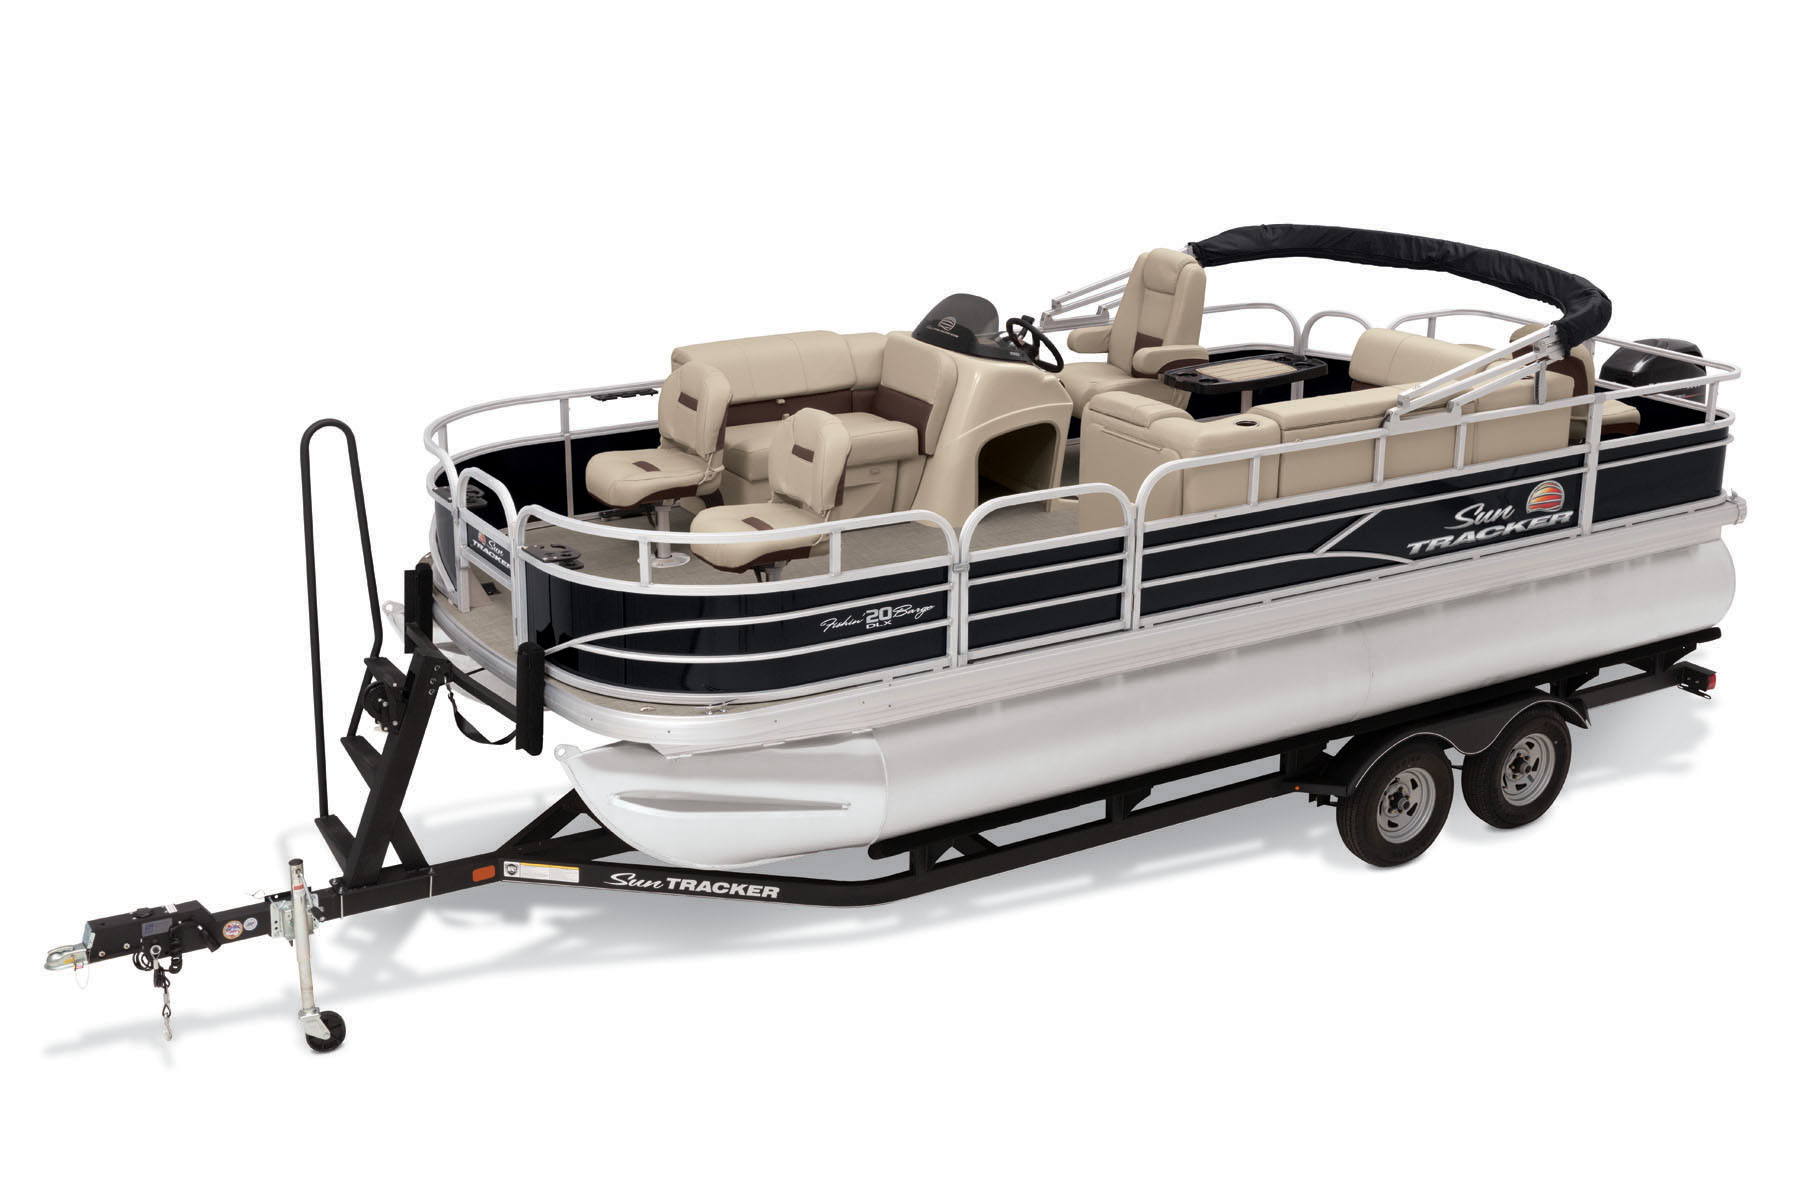 toy pontoon boat with trailer